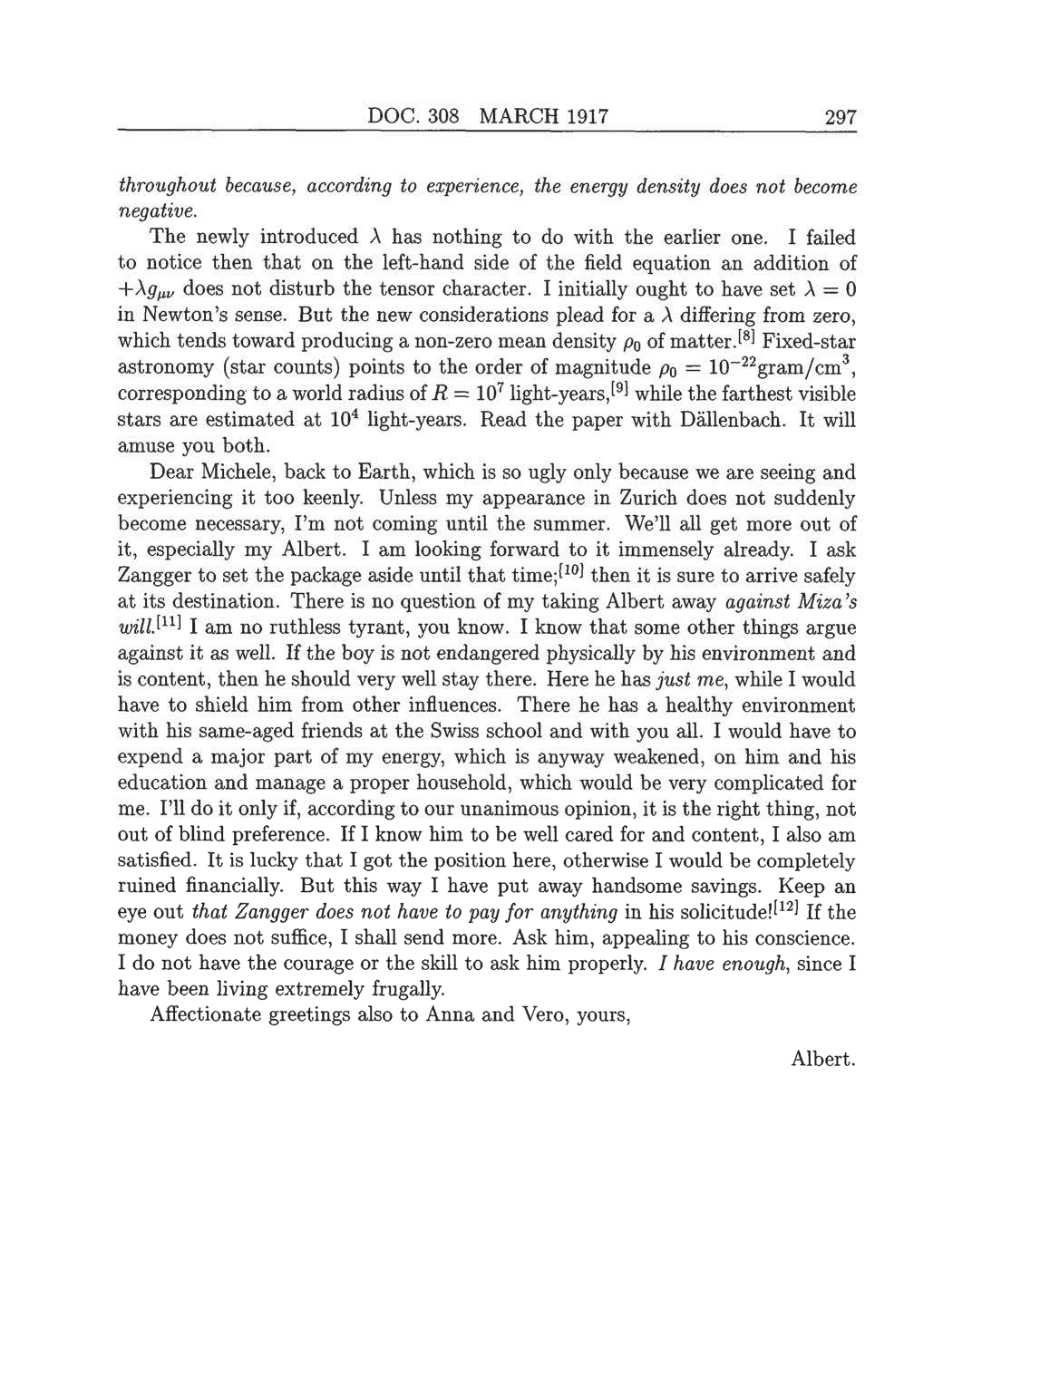 Volume 8: The Berlin Years: Correspondence, 1914-1918 (English translation supplement) page 297